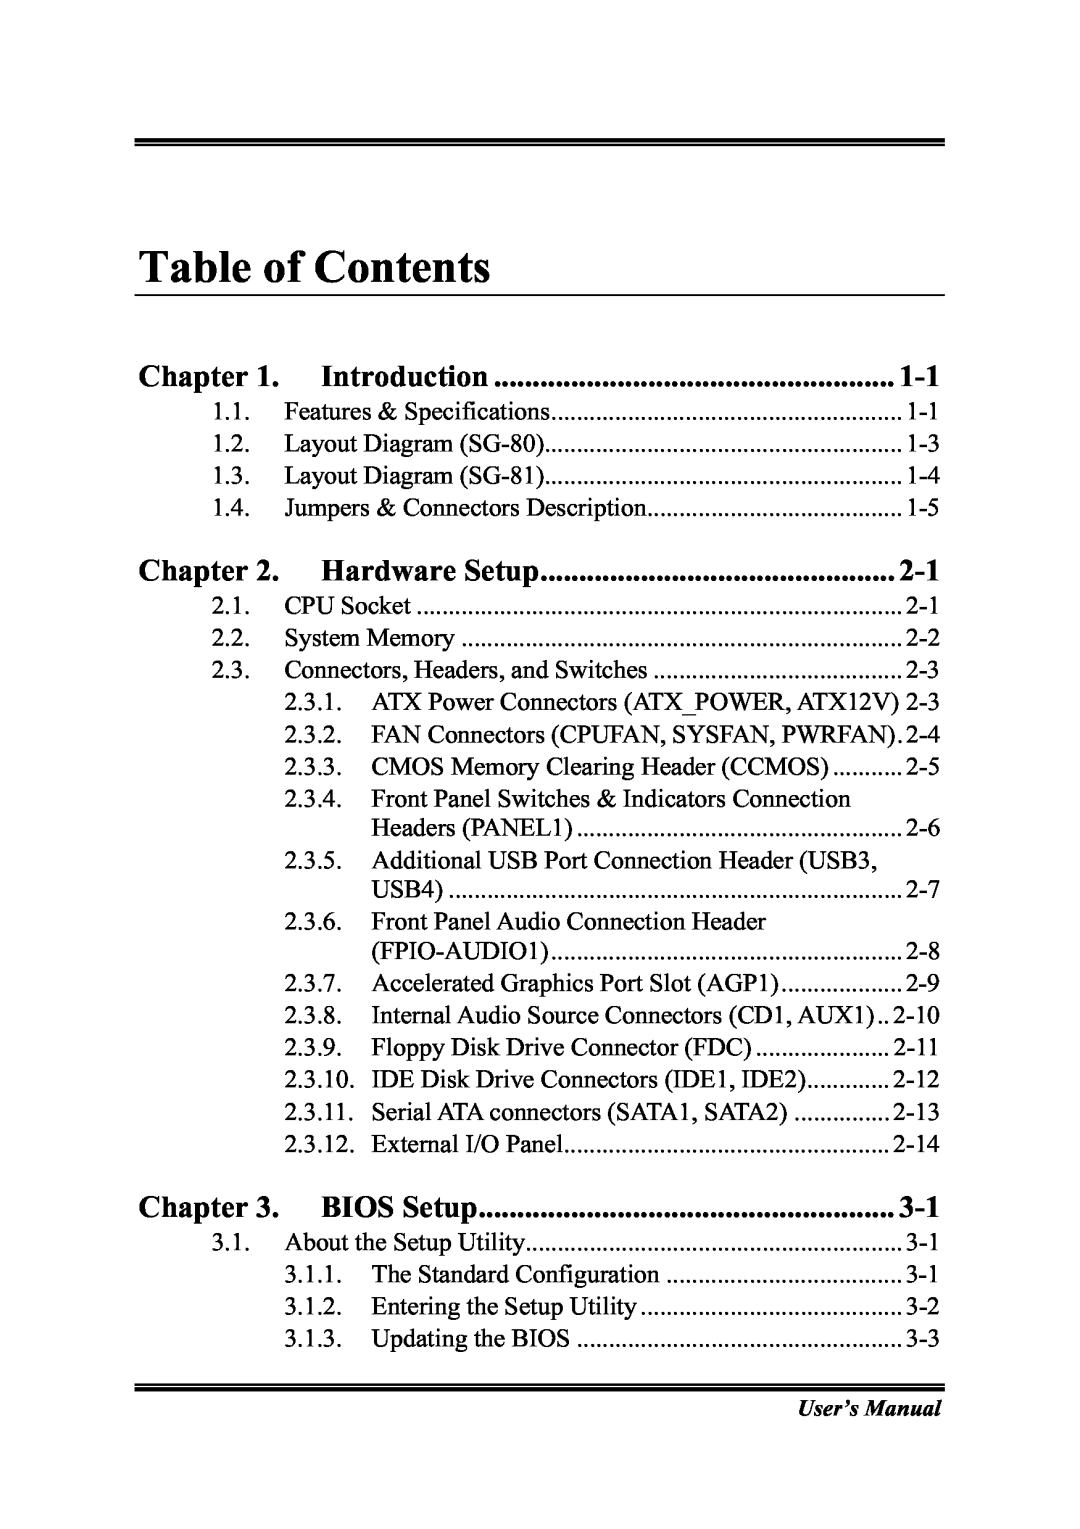 Intel SG-81, SG-80 user manual Chapter, Introduction, Hardware Setup, BIOS Setup, Table of Contents 